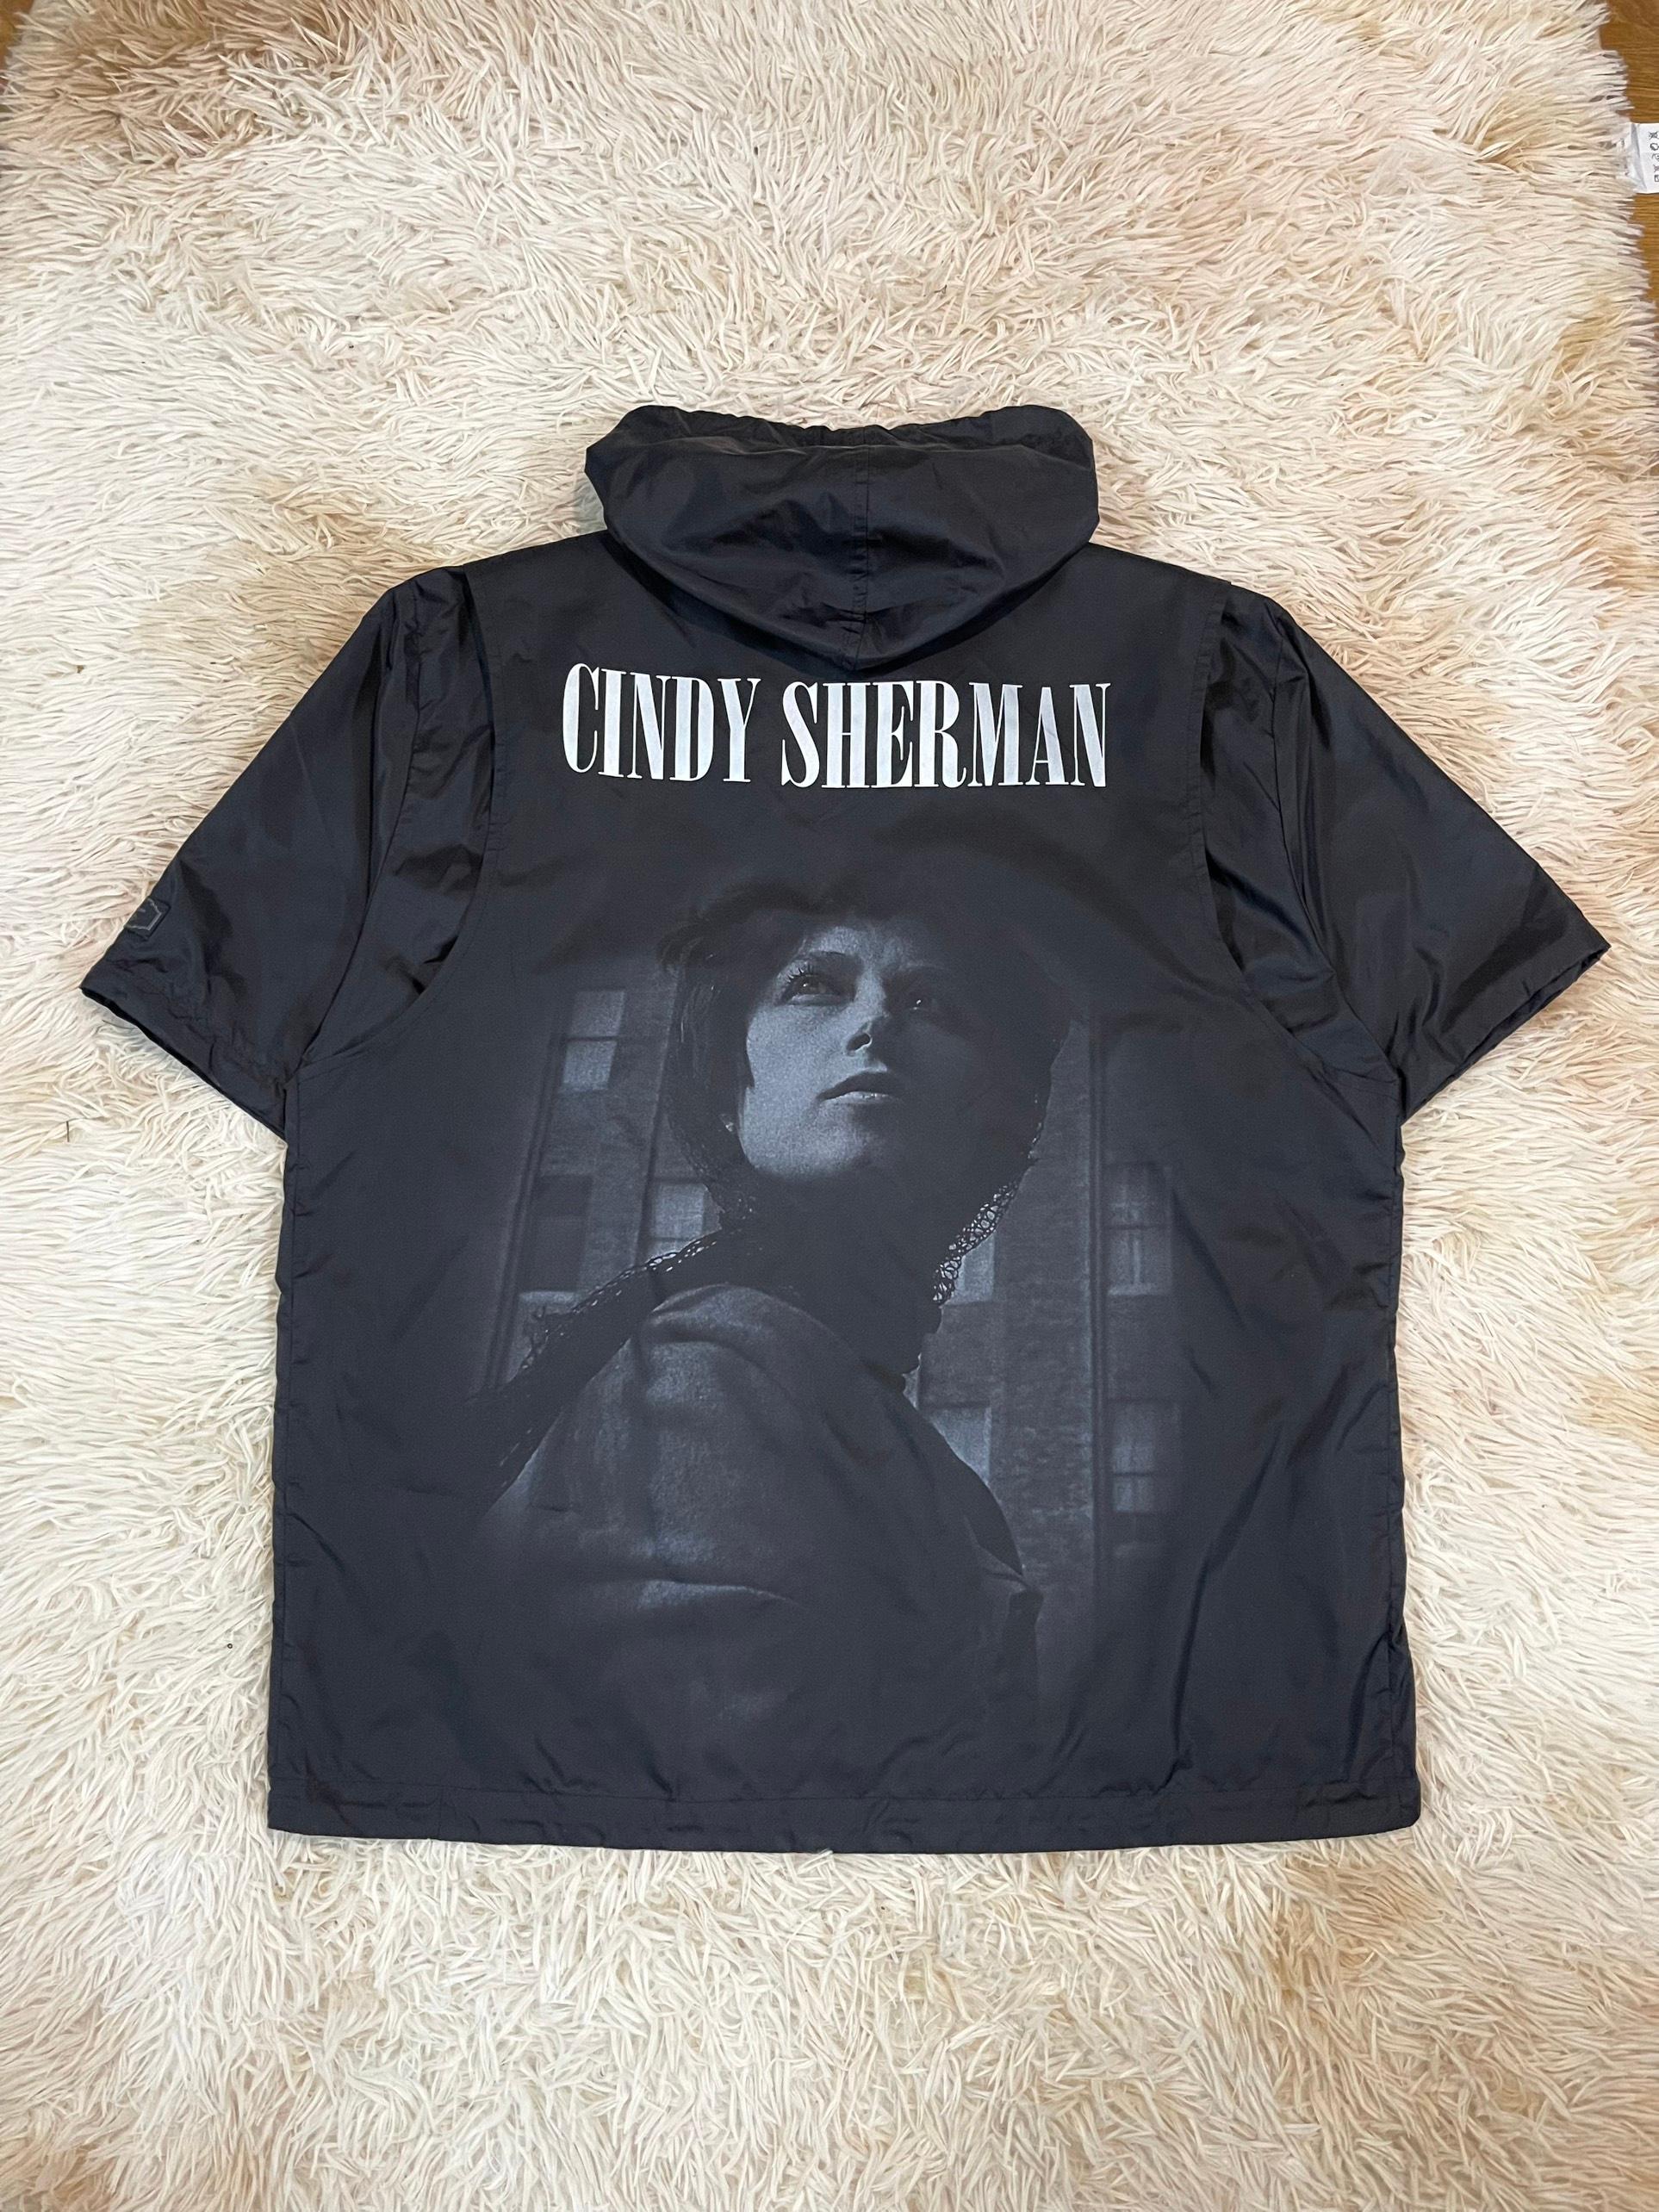 Undercover x Cindy Sherman S/S2020 Short Sleeve Nylon Jacket In Excellent Condition For Sale In Tương Mai Ward, Hoang Mai District